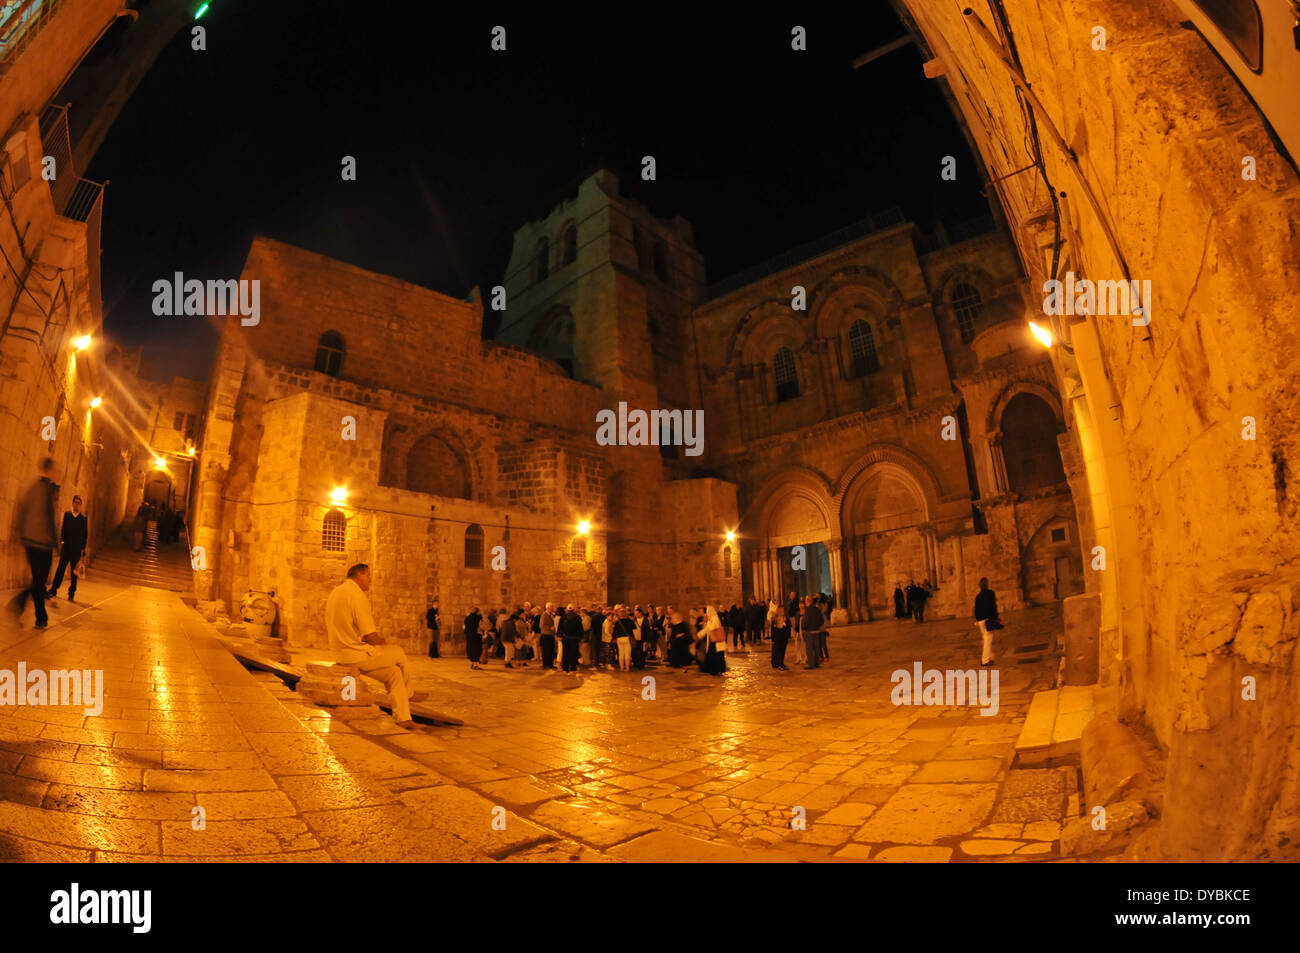 Courtyard and Church or Basilica of the Holy Sepulcher, Christian quarter, Old city of Jerusalem, Israel Stock Photo